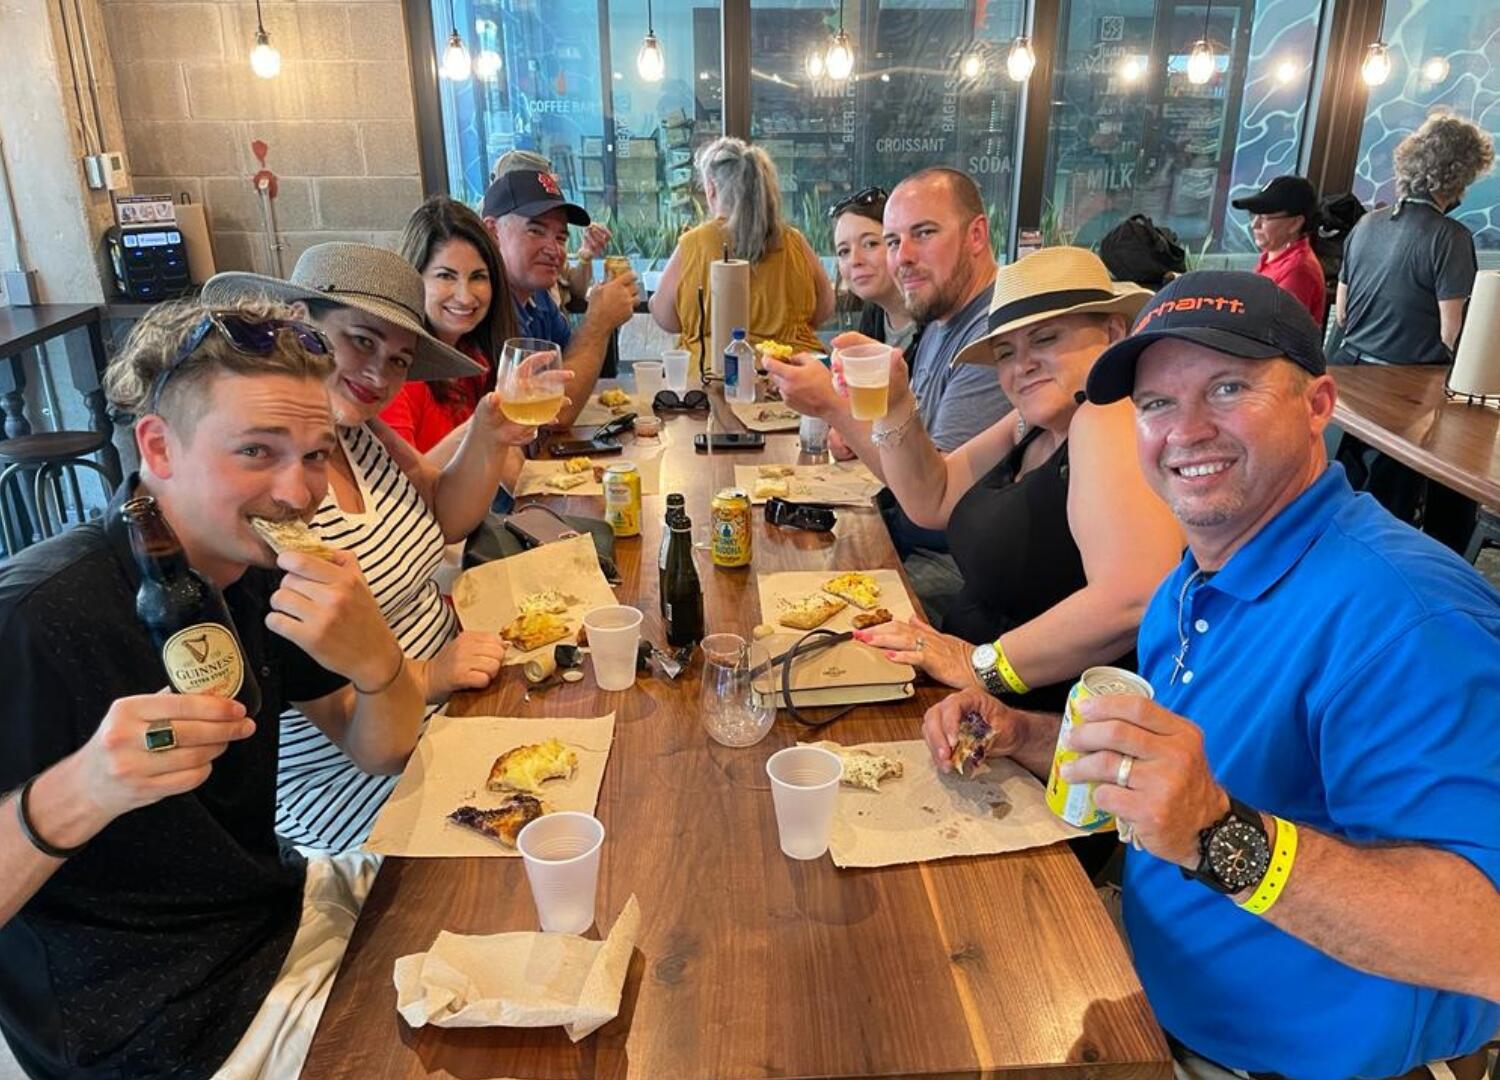 A group of people on a Miami Food Tour, sitting at a table and enjoying a culinary experience together.